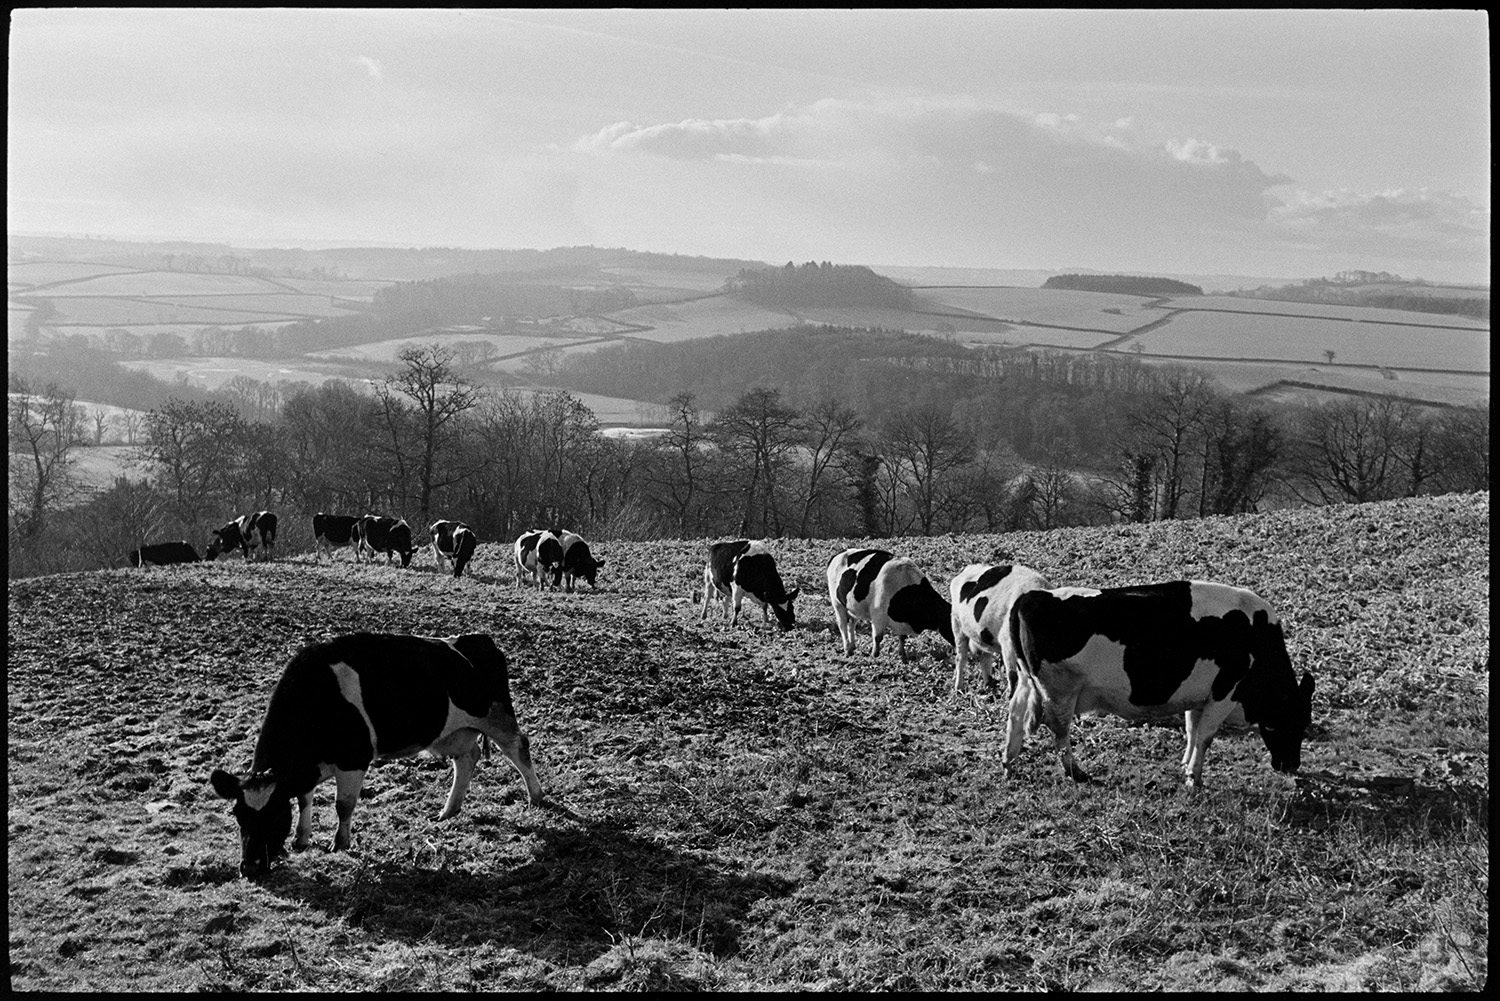 Cows in frosty sunny morning feeding up to fence set by farmer. 
[Cows grazing in a field along a fence running through the field, on a frosty morning, at Harepath, Beaford. A landscape of trees, fields, hedgerows and clouds can be seen in the background.]